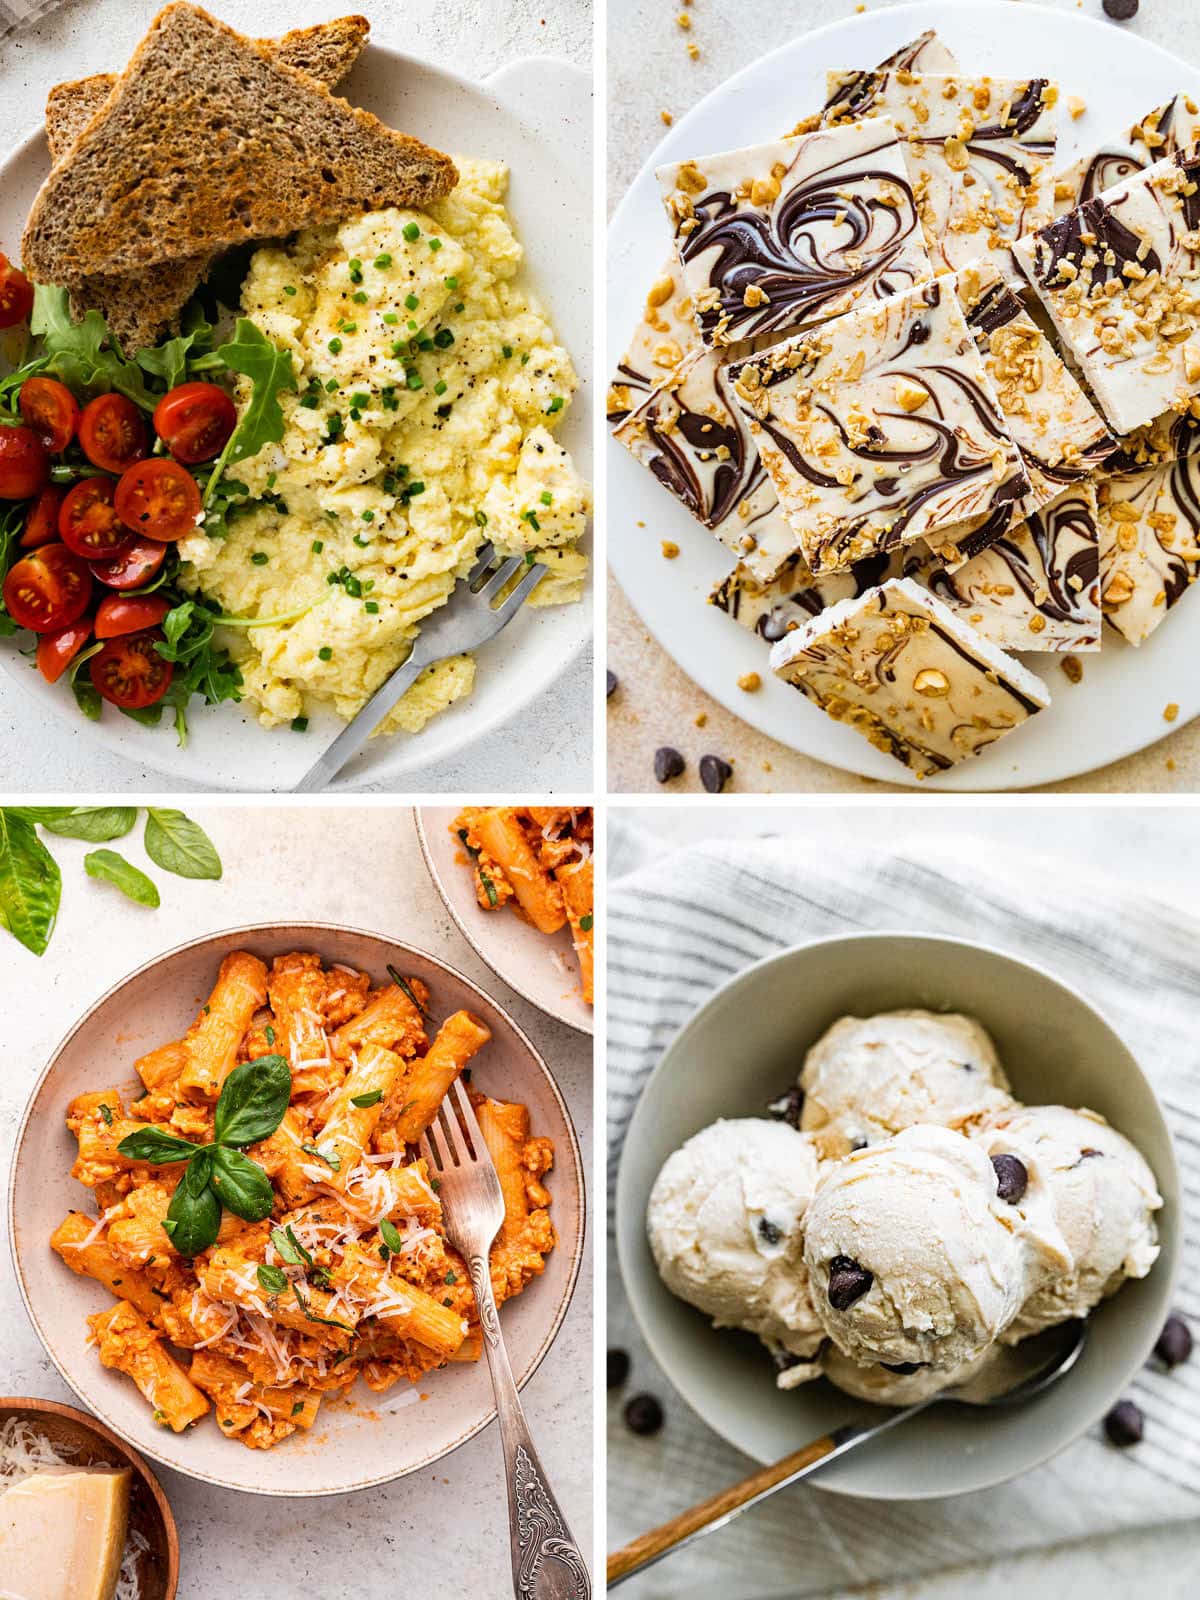 Collage photos of cottage cheese scrambled eggs, cottage cheese bark, cottage cheese pasta and cottage cheese ice cream.